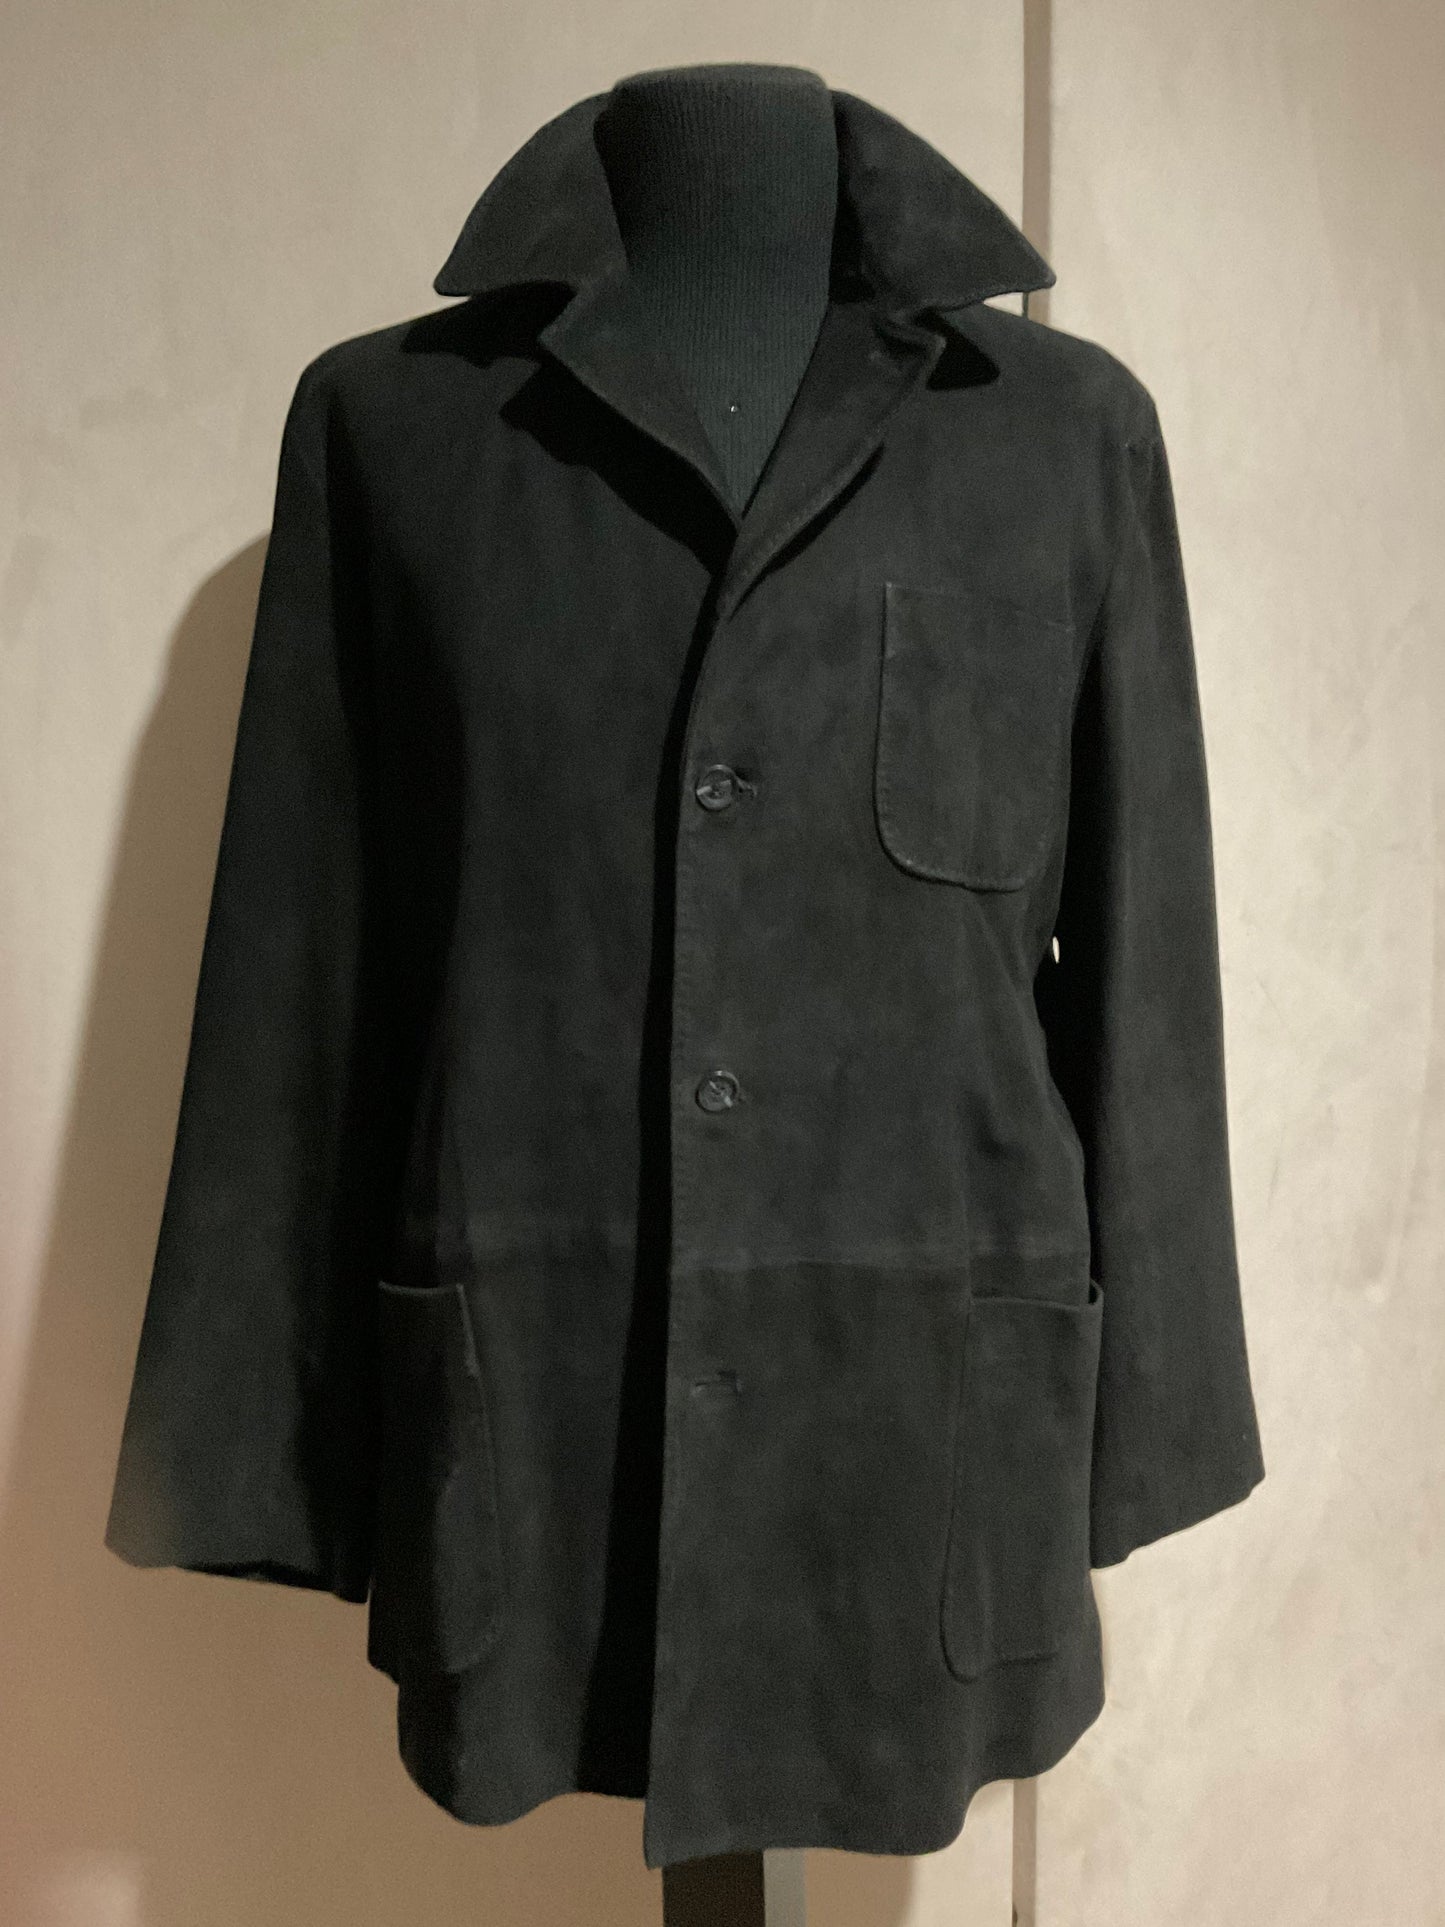 R P SUEDE JACKET / MEDIUM - LARGE / BLACK / NEW / MADE IN ITALY